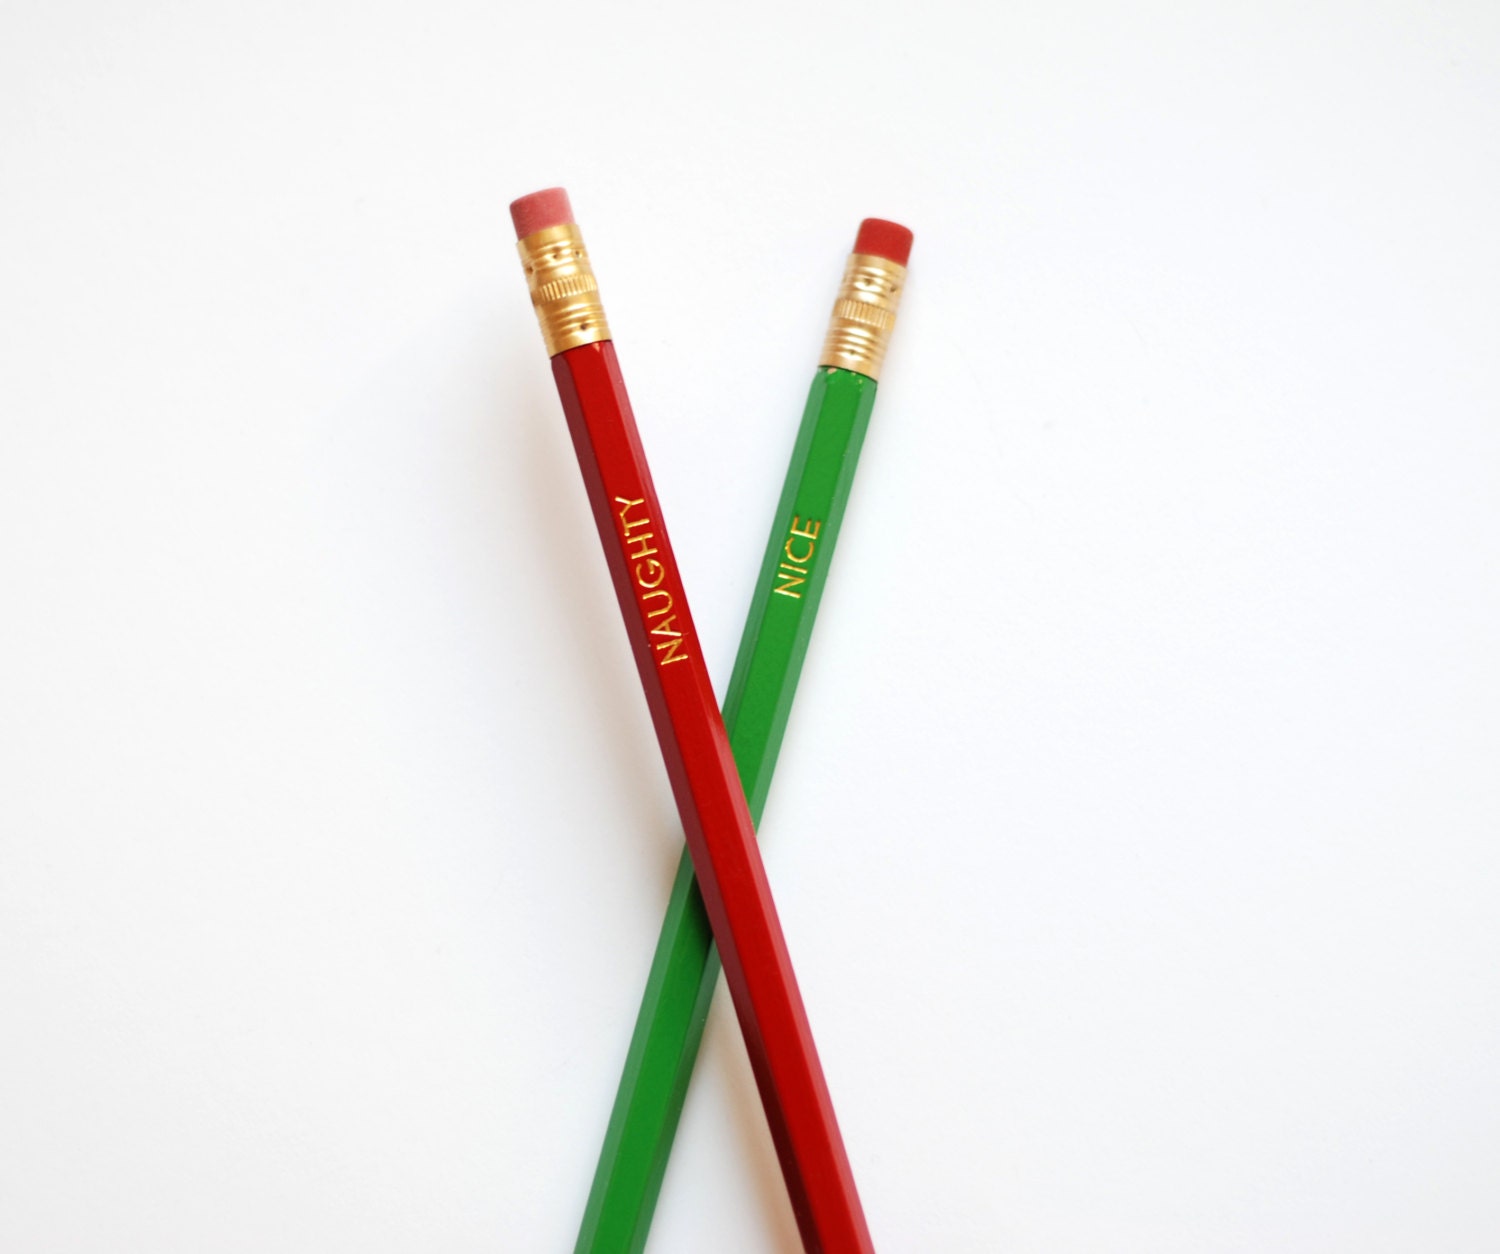 Pencils - Stocking Stuffer - Christmas Stocking Stuffer - Naughty or Nice - Christmas Pencils - Gift Under 10 - Red and Green Pencils - RowHouse14